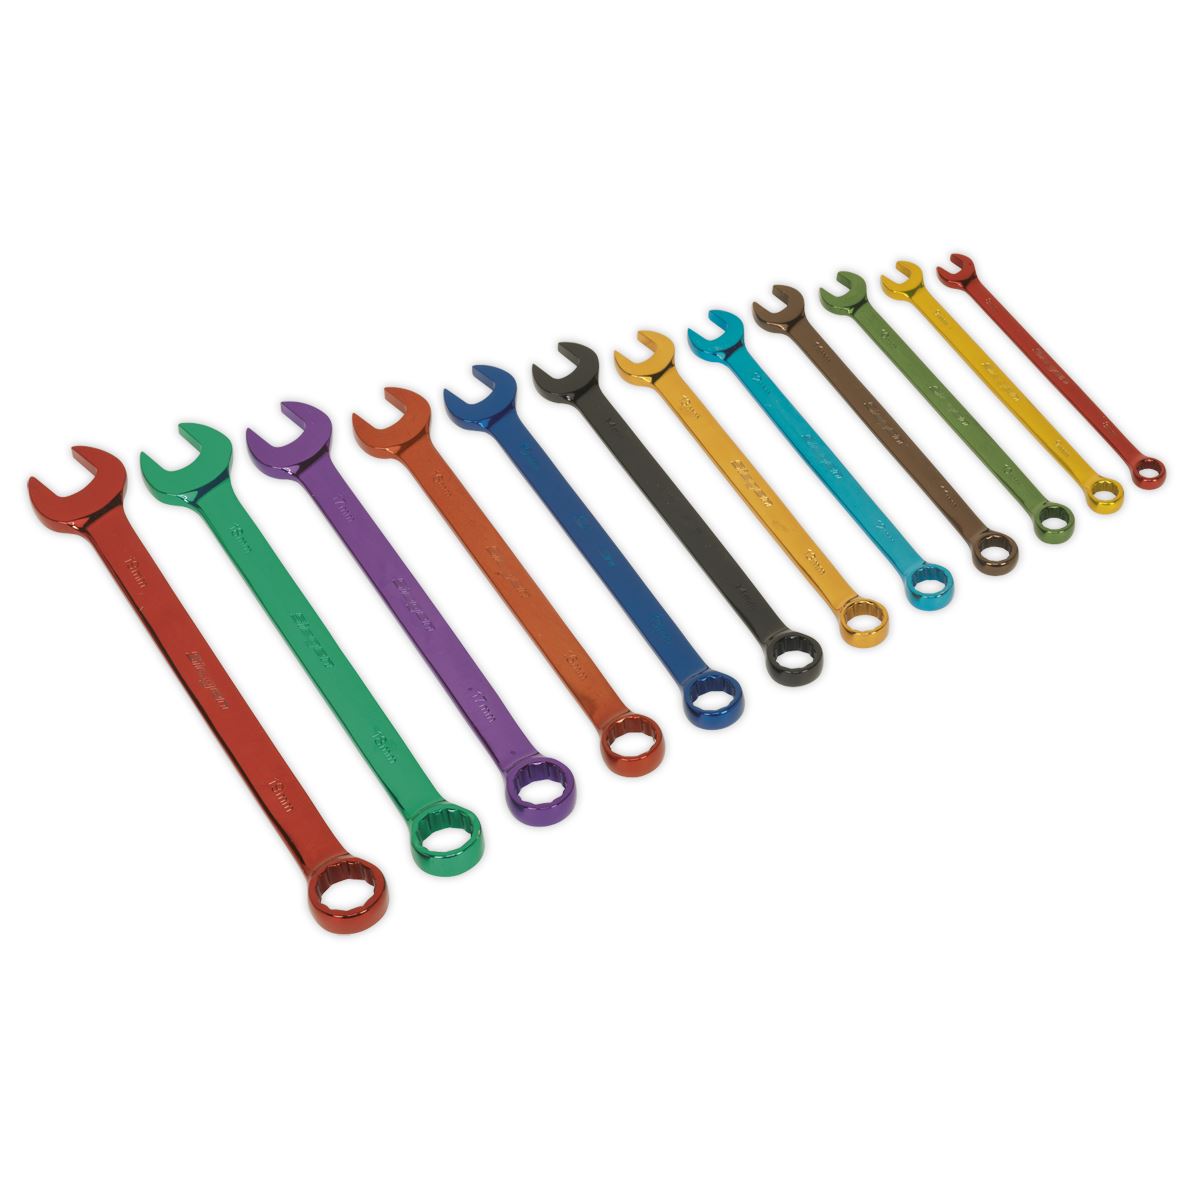 Siegen by Sealey Combination Spanner Set 12pc Multi-Coloured Metric